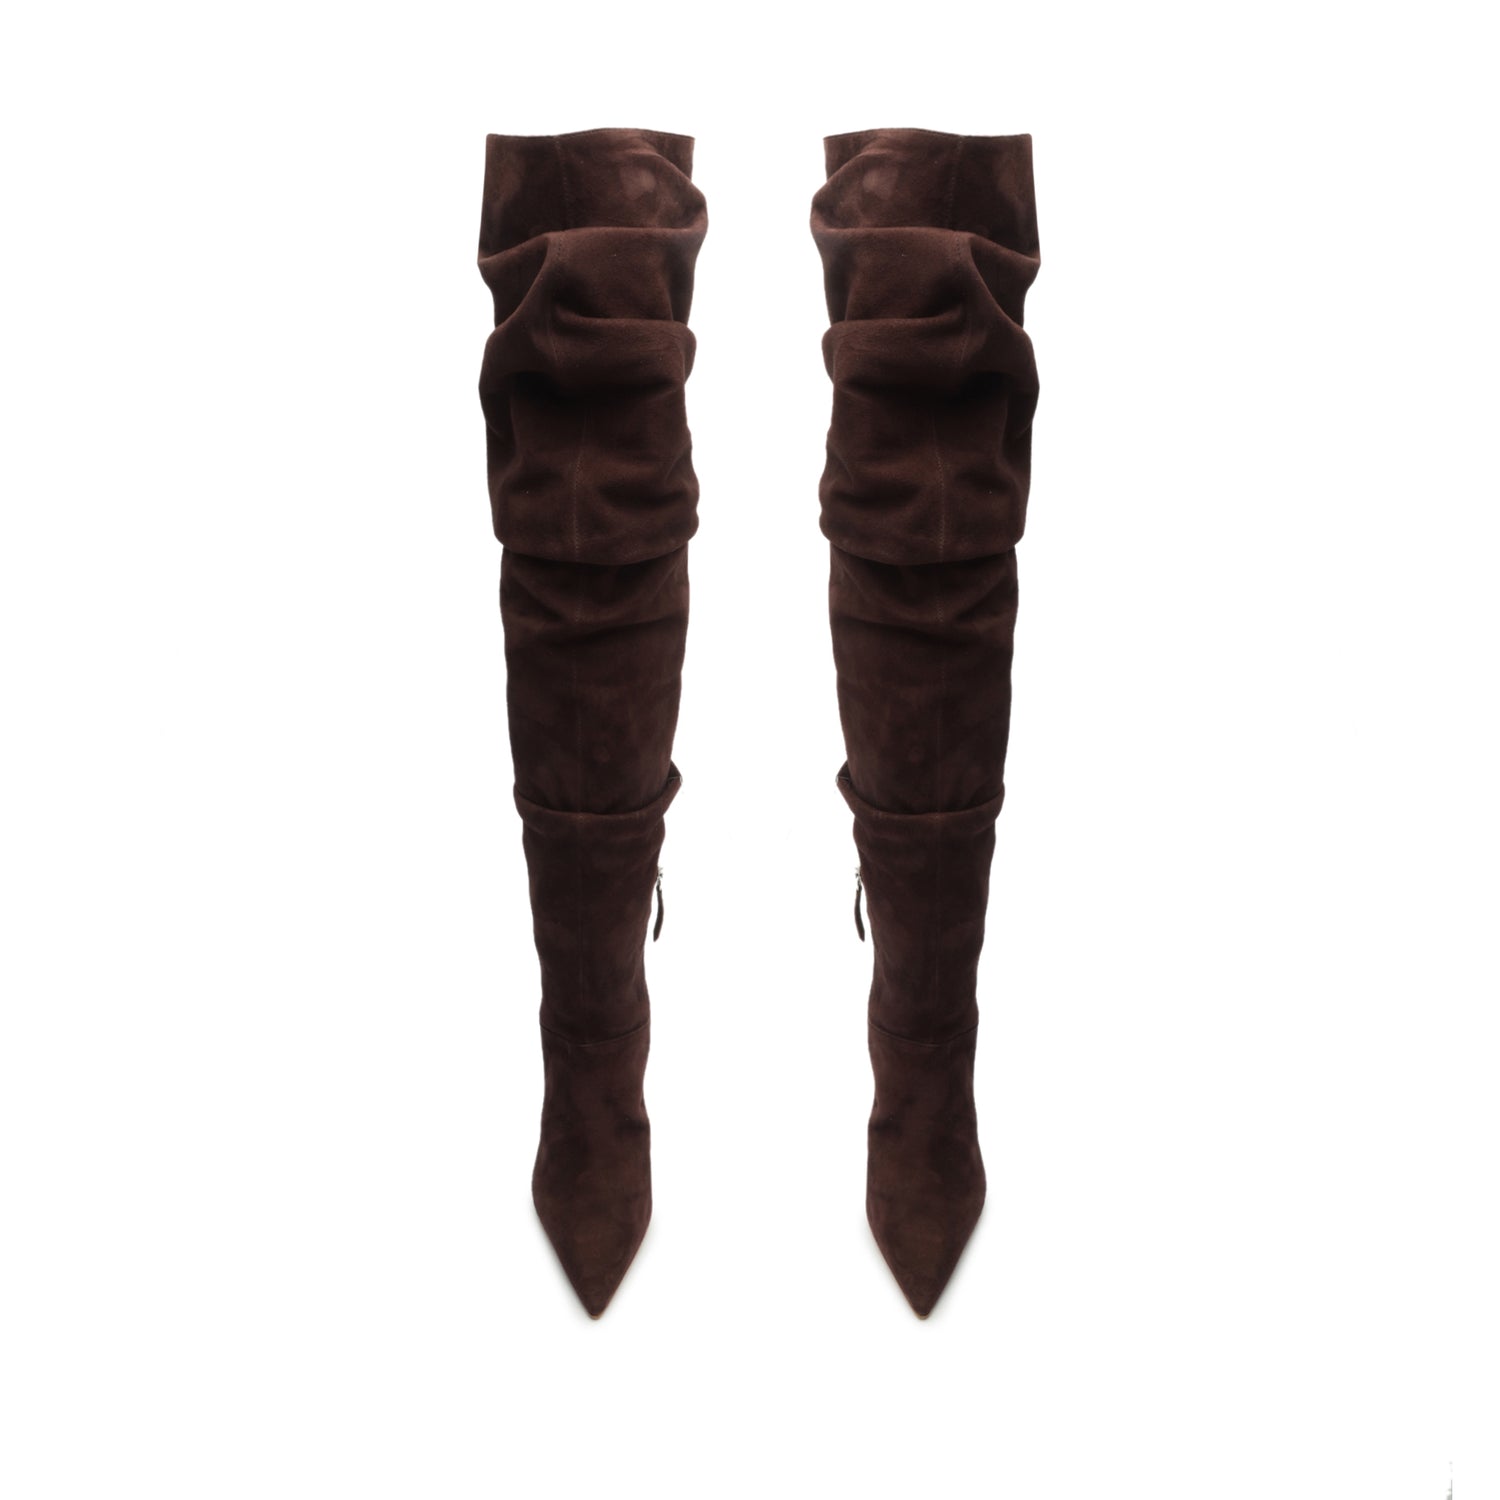 Ashlee Over The Knee Suede Boot Boots FALL 23    - Schutz Shoes